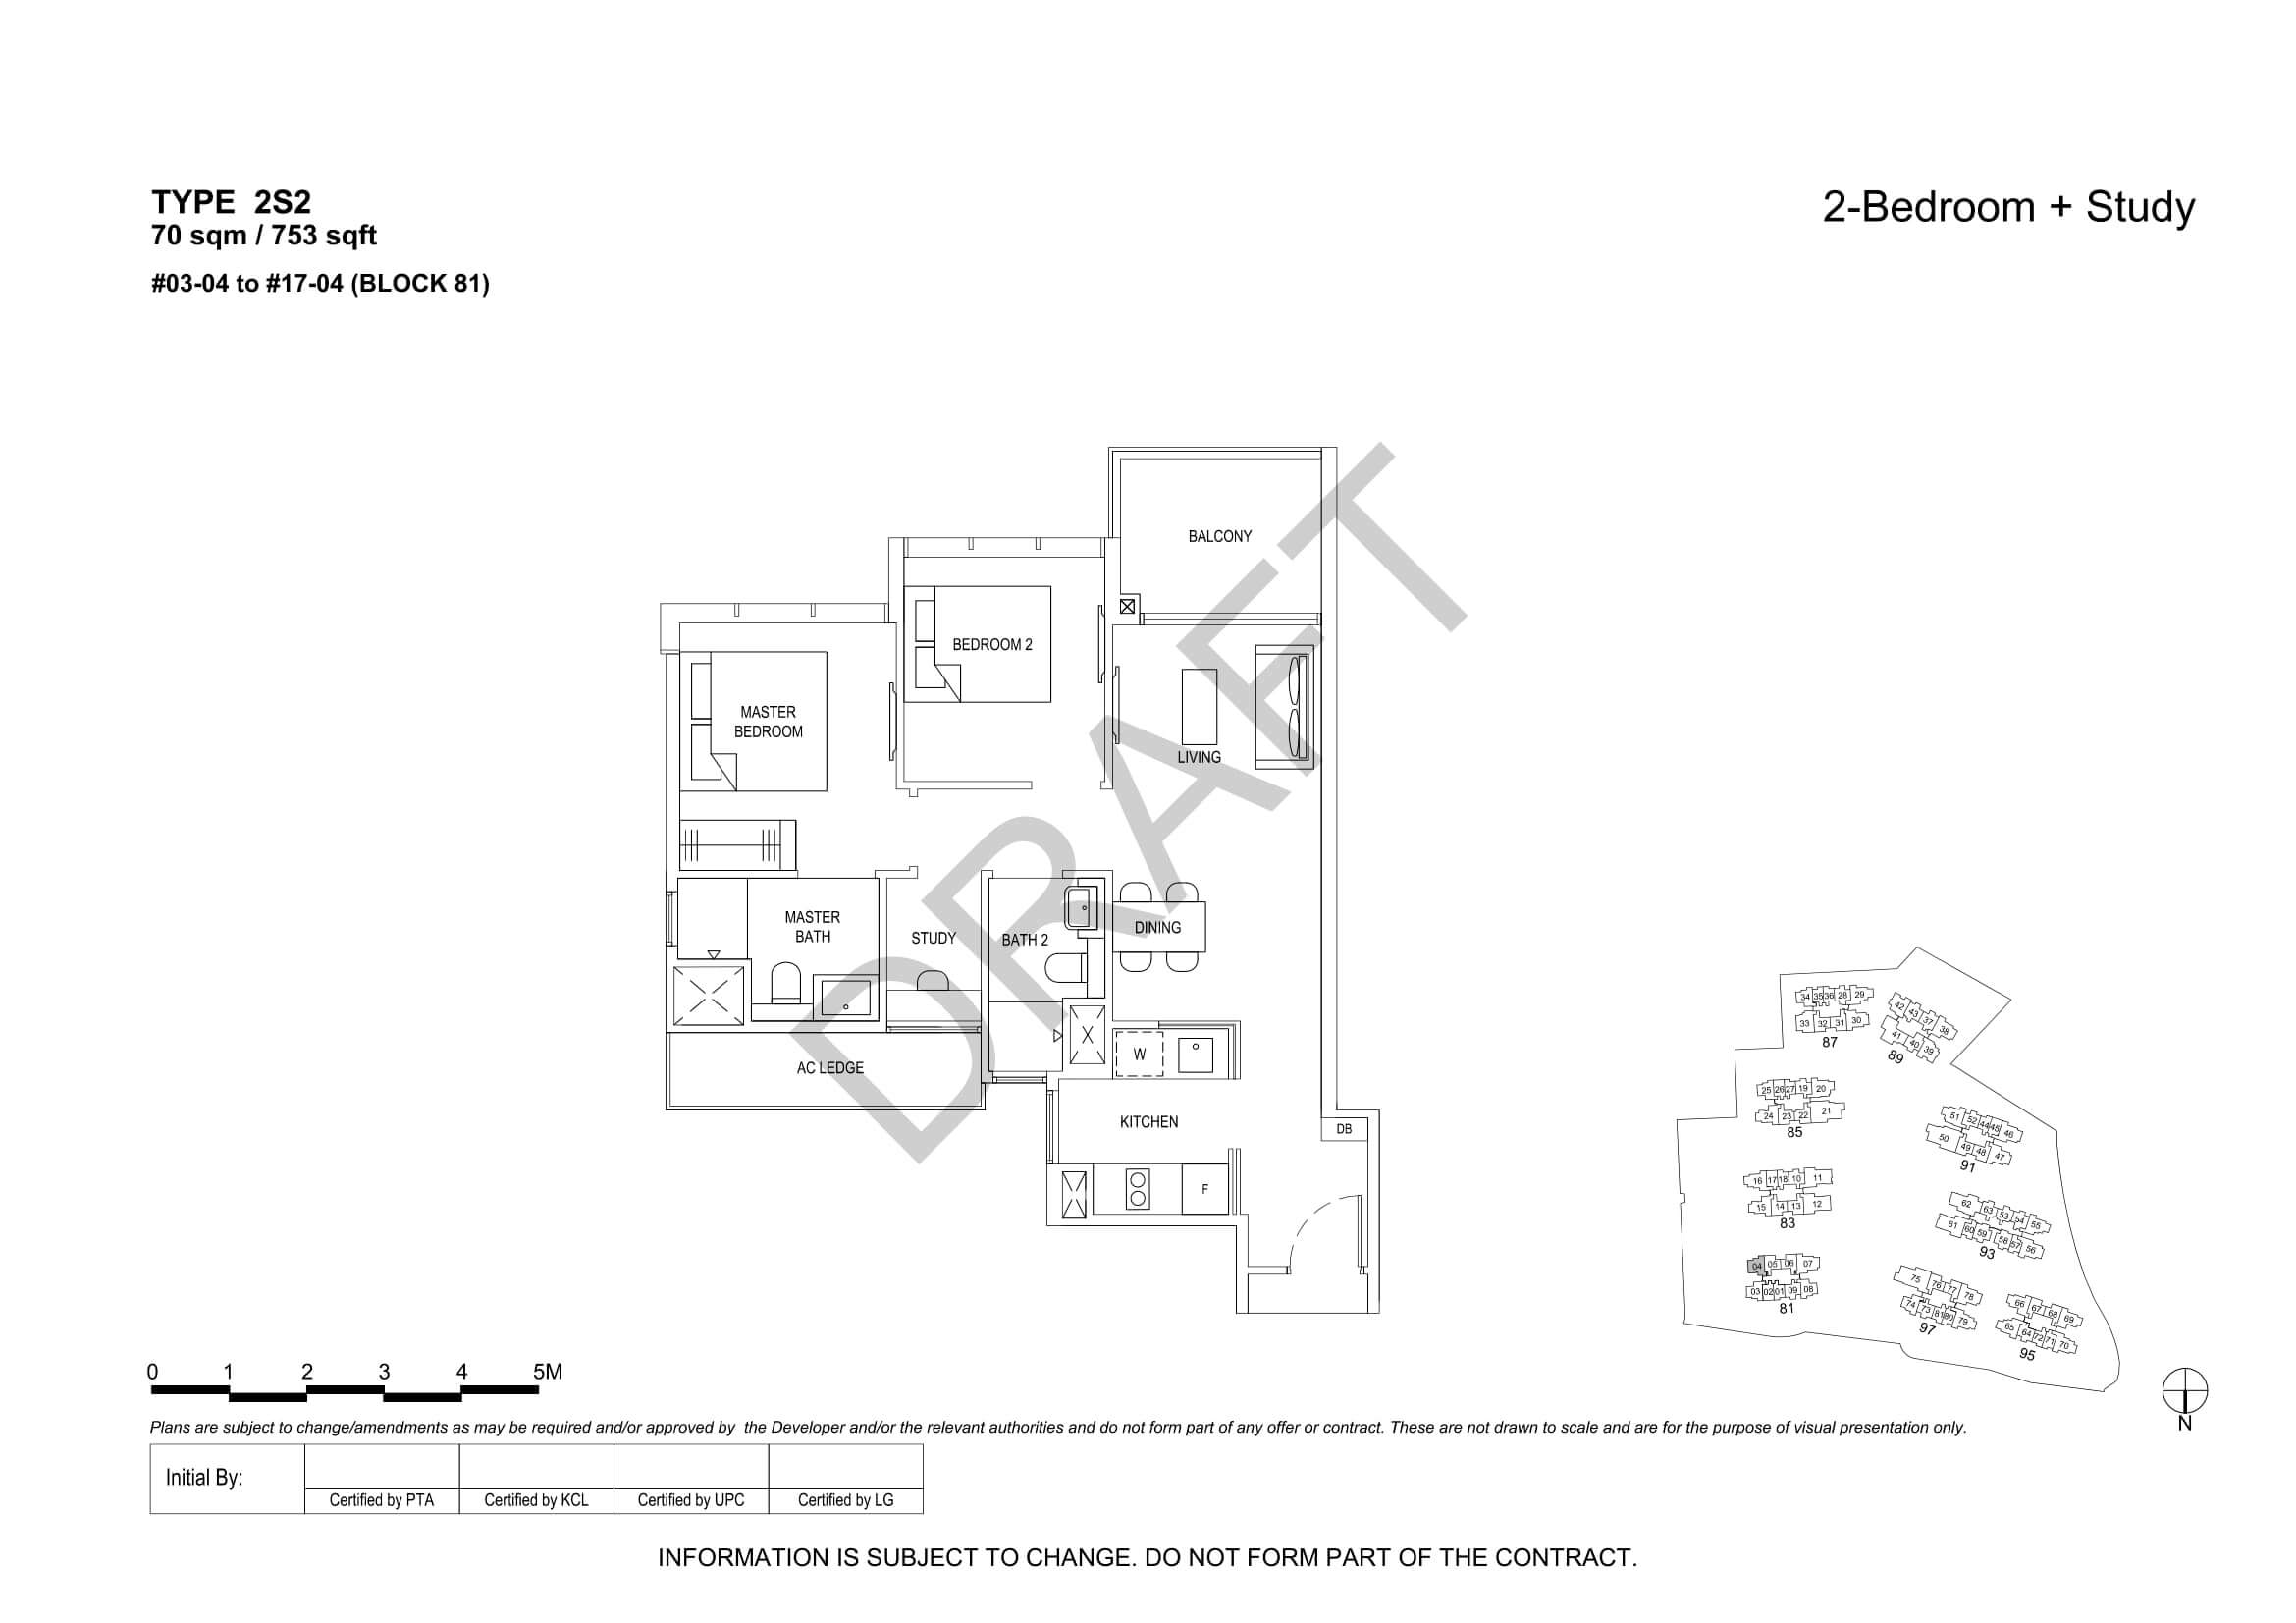 The Florence Residences Floor Plan 2-Bedroom Study Type 2S2